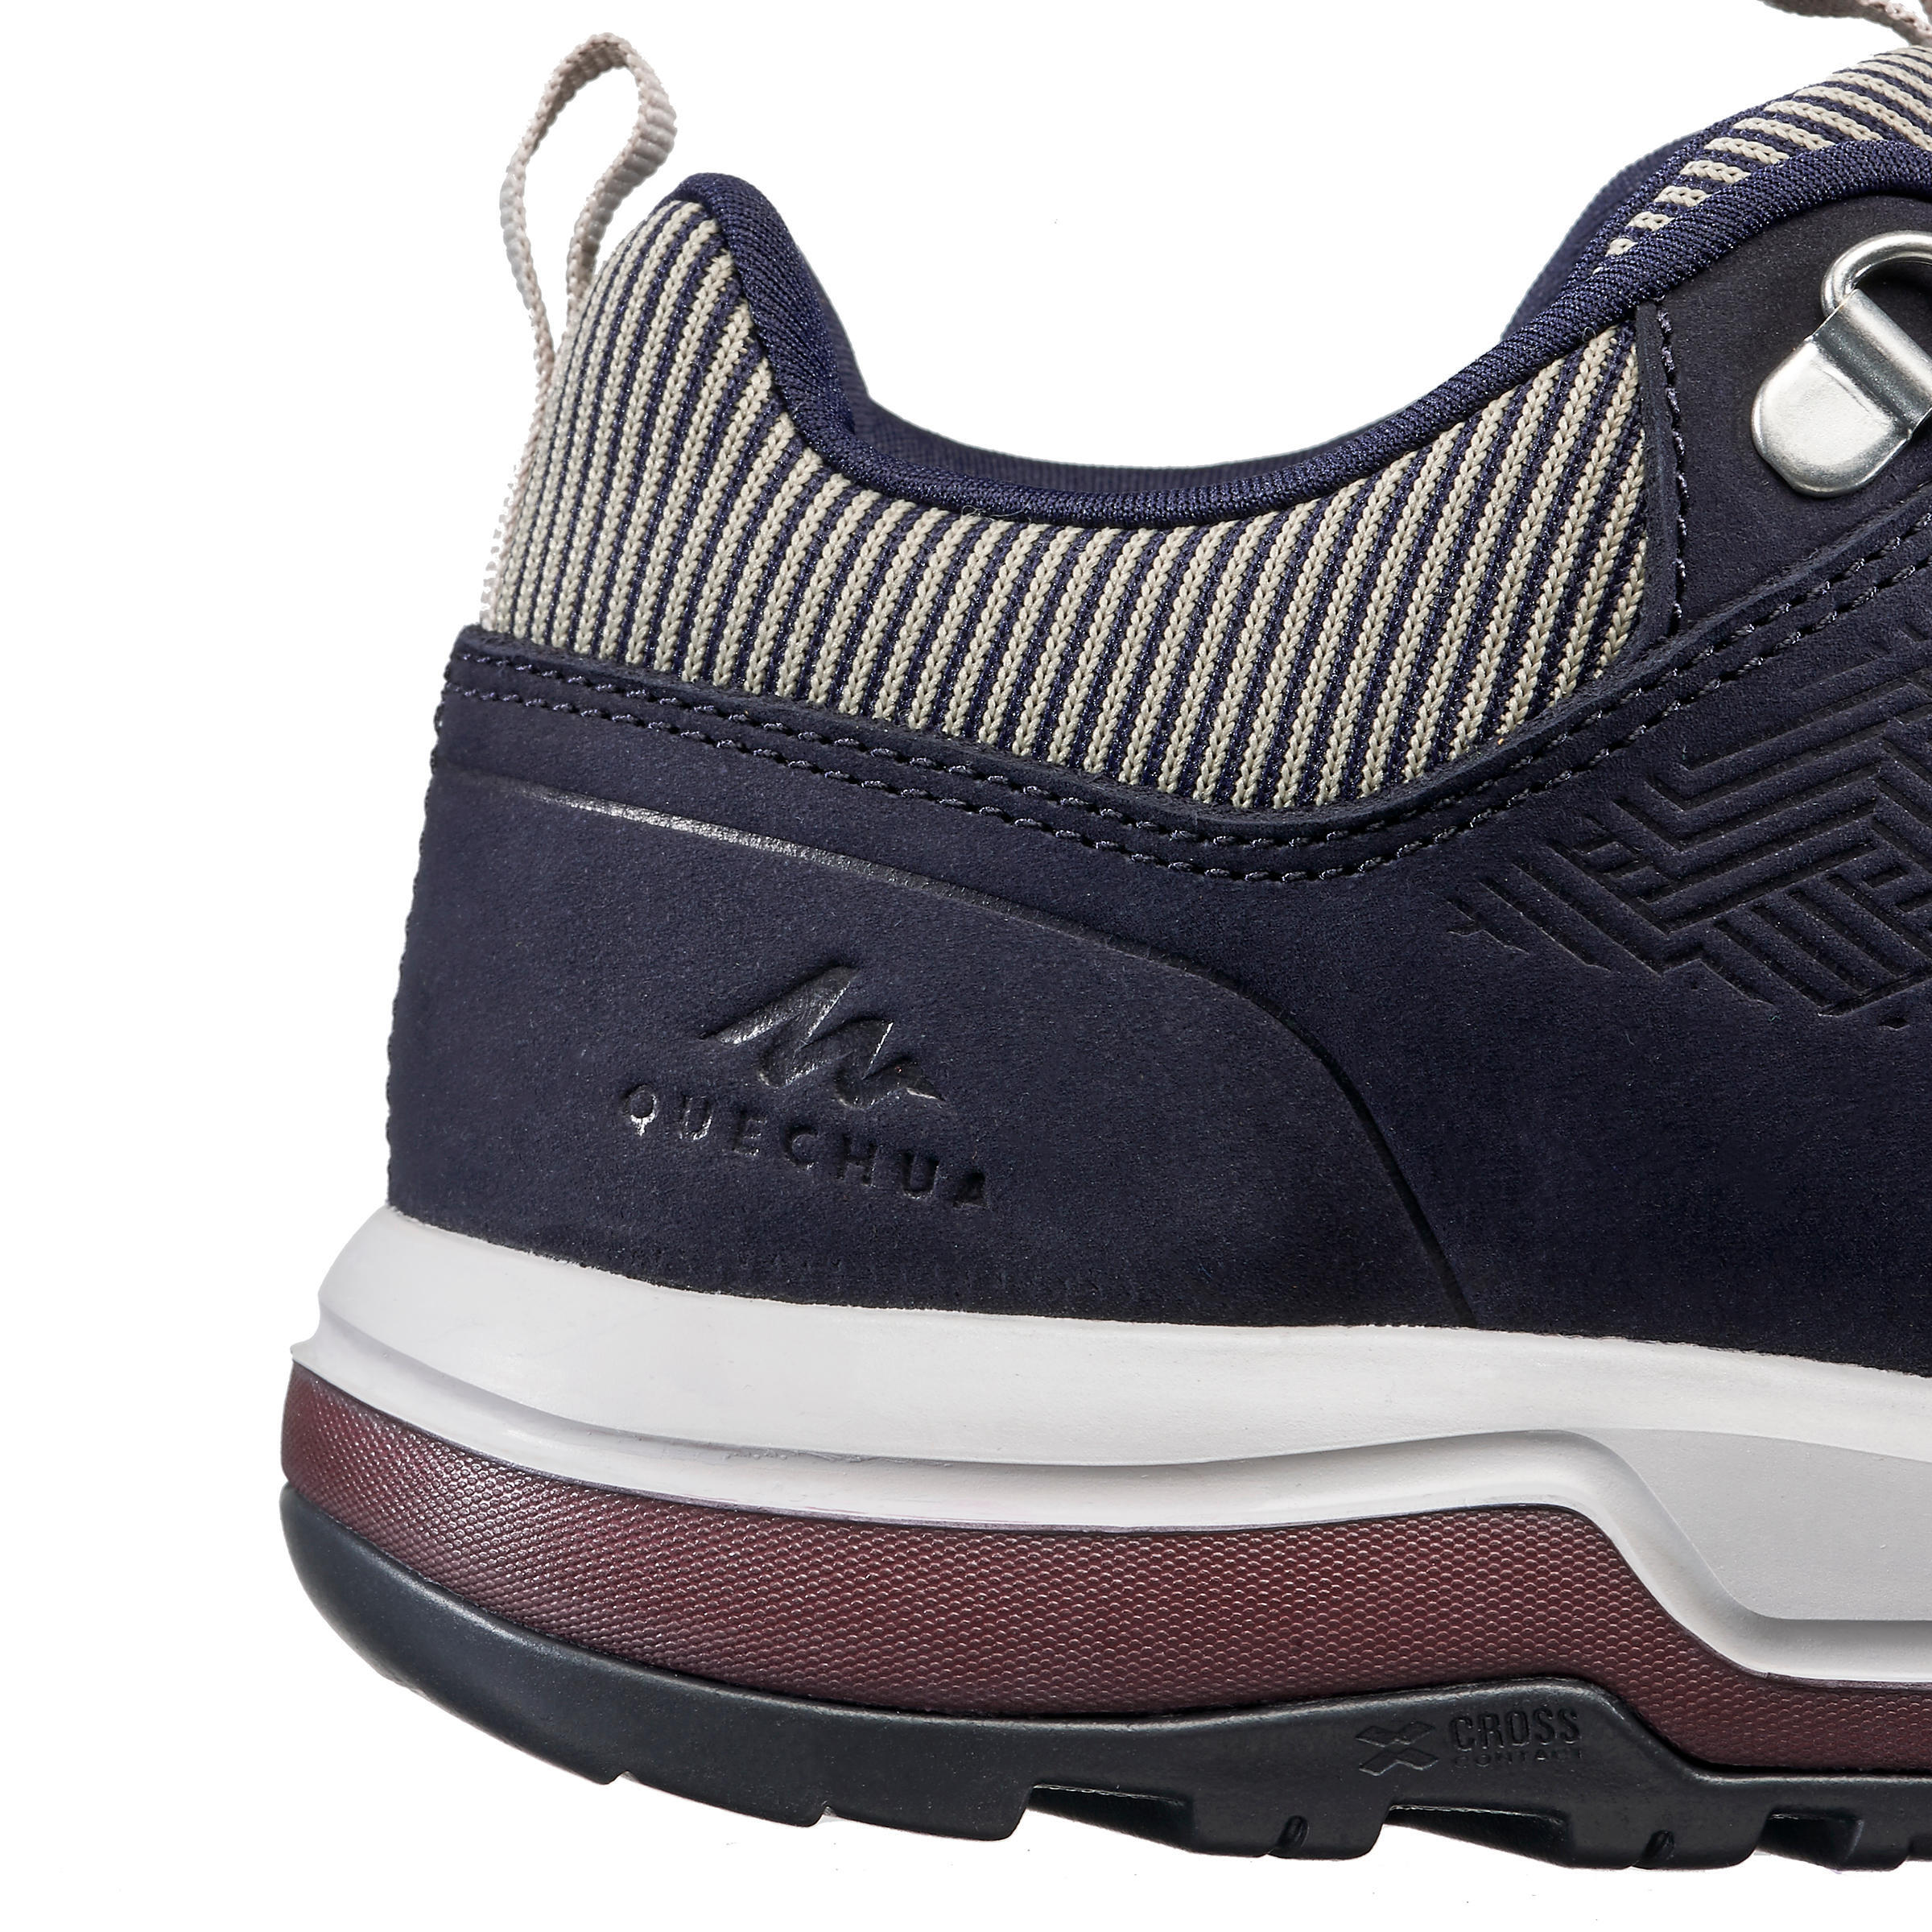 Women's Eco-Friendly Country Walking Shoes - Navy 2/9